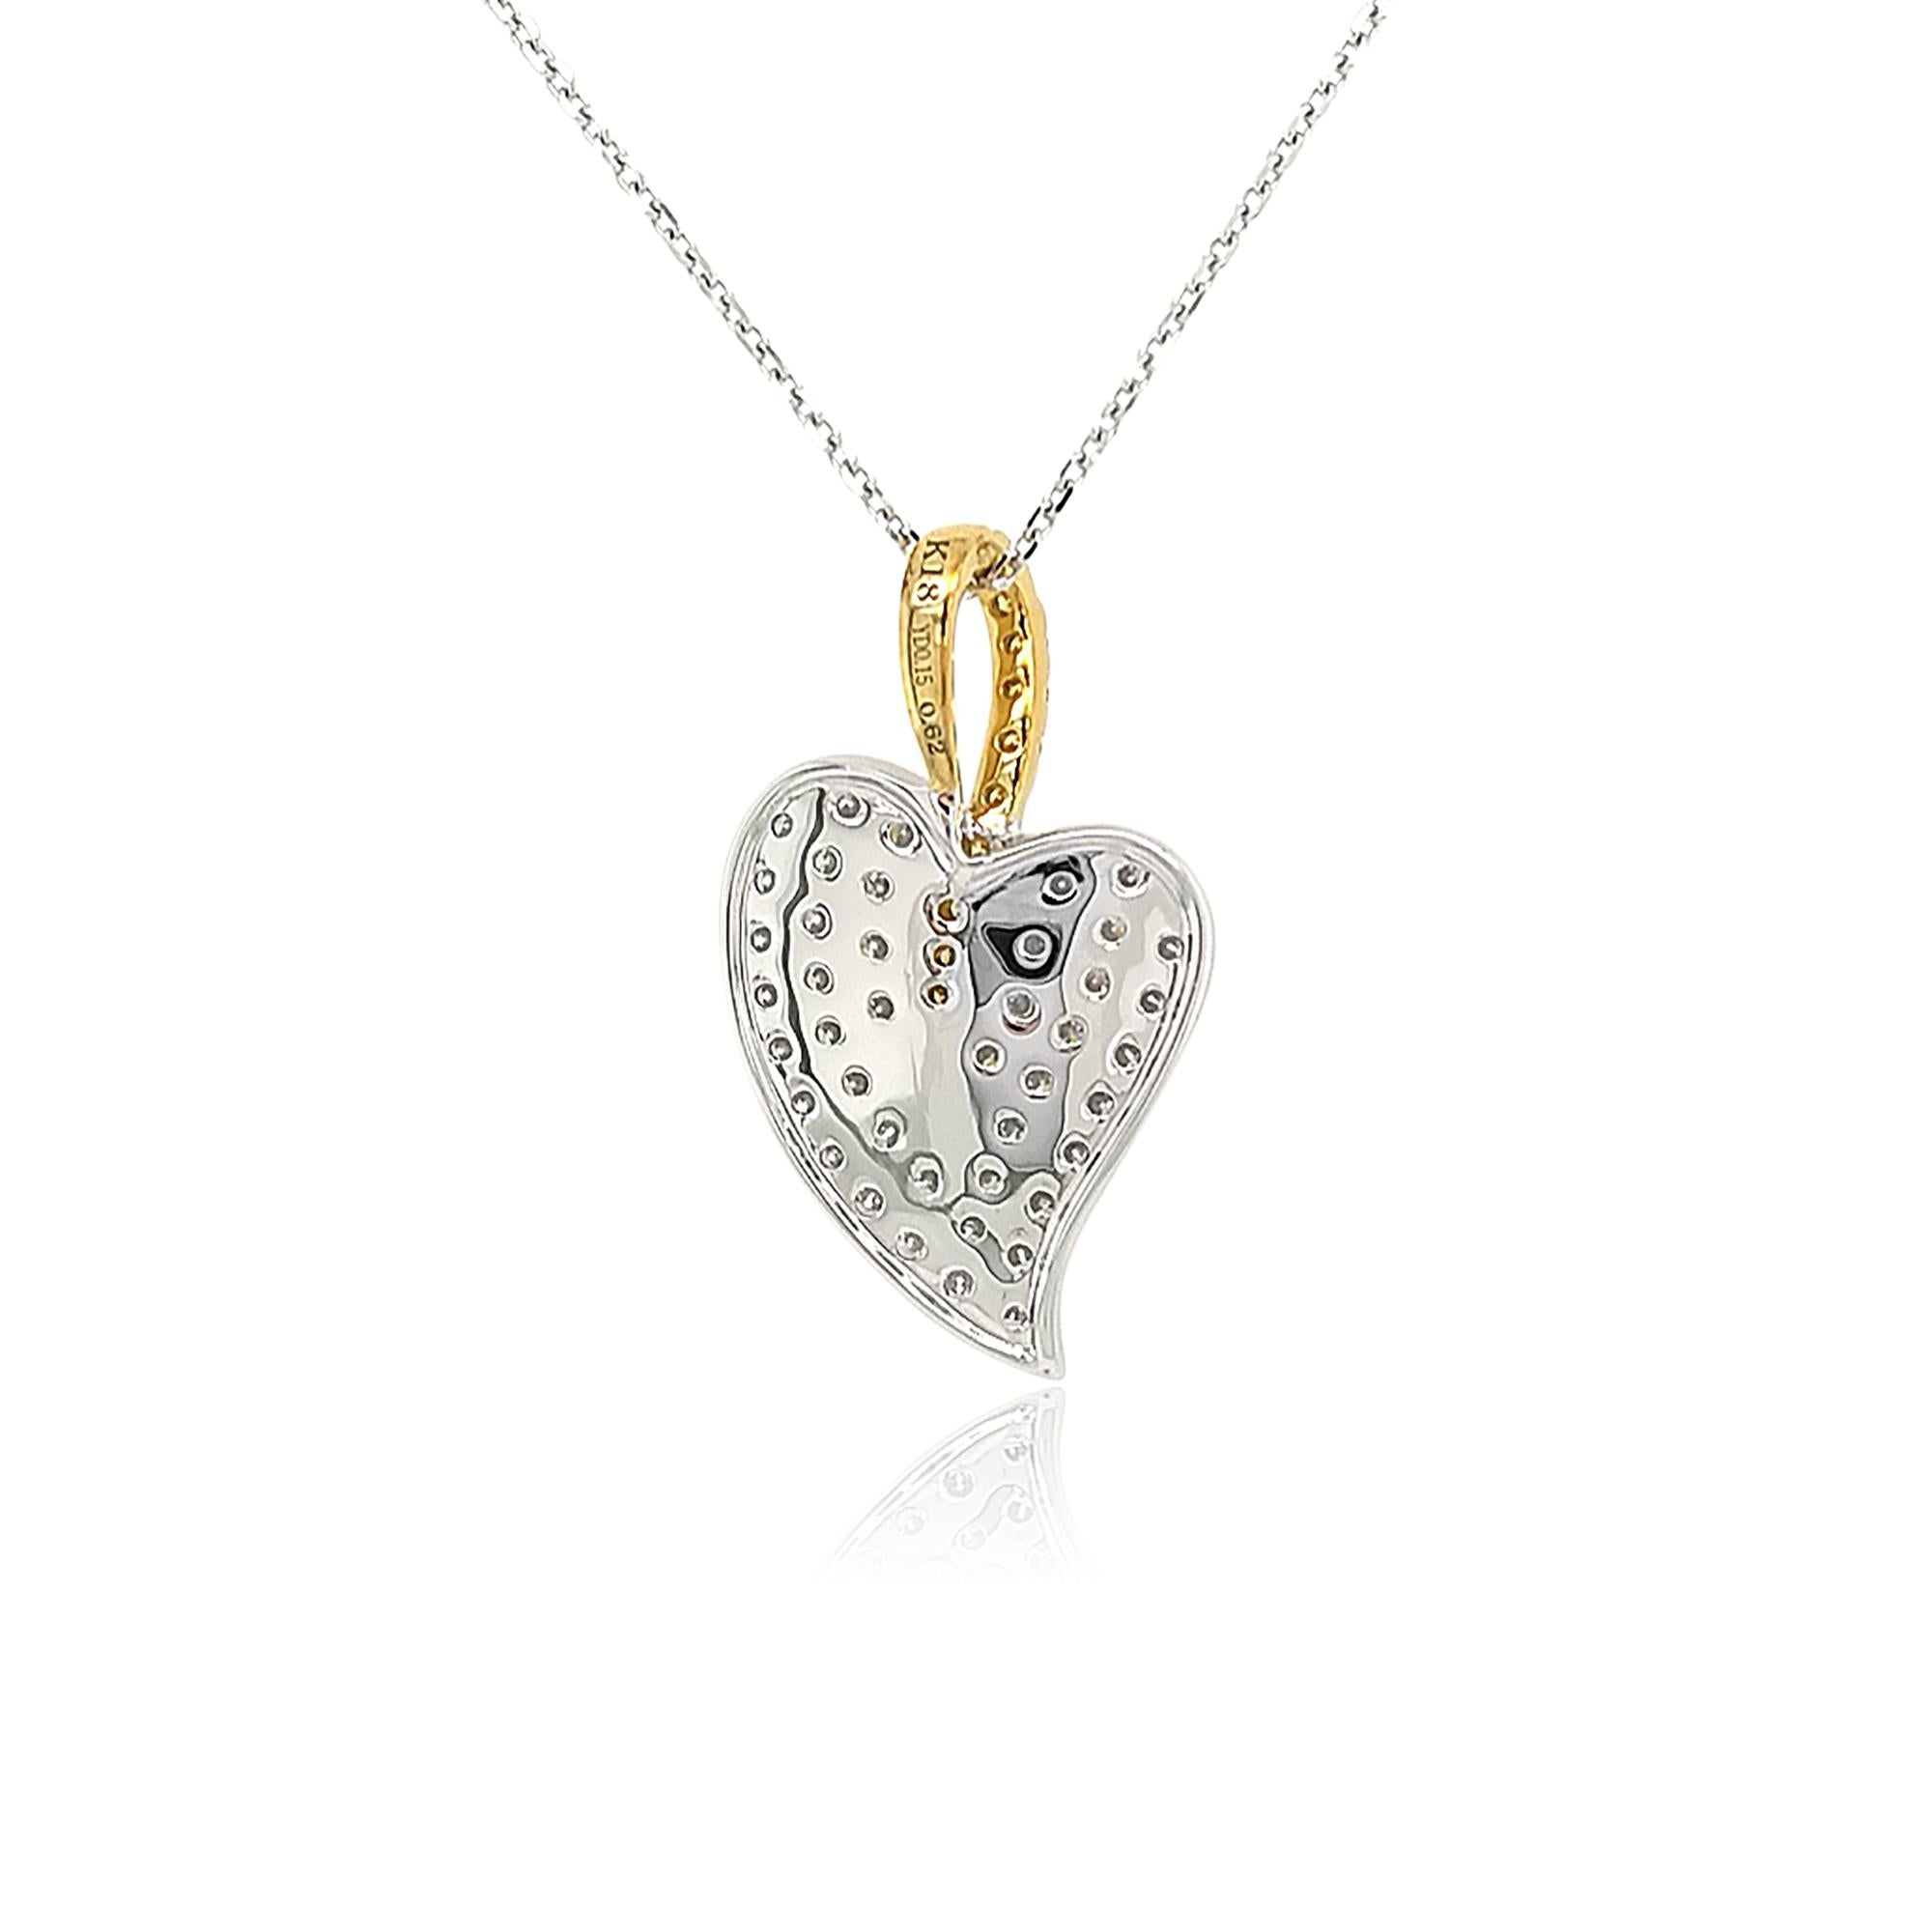 This alluring pendant features a section of pavé set natural Yellow Diamonds and White Diamonds, set in 18K White and Yellow Gold. A contemporary twist on a classic combination, this pendant will add a sumptuous pop of colour to even the simplest of